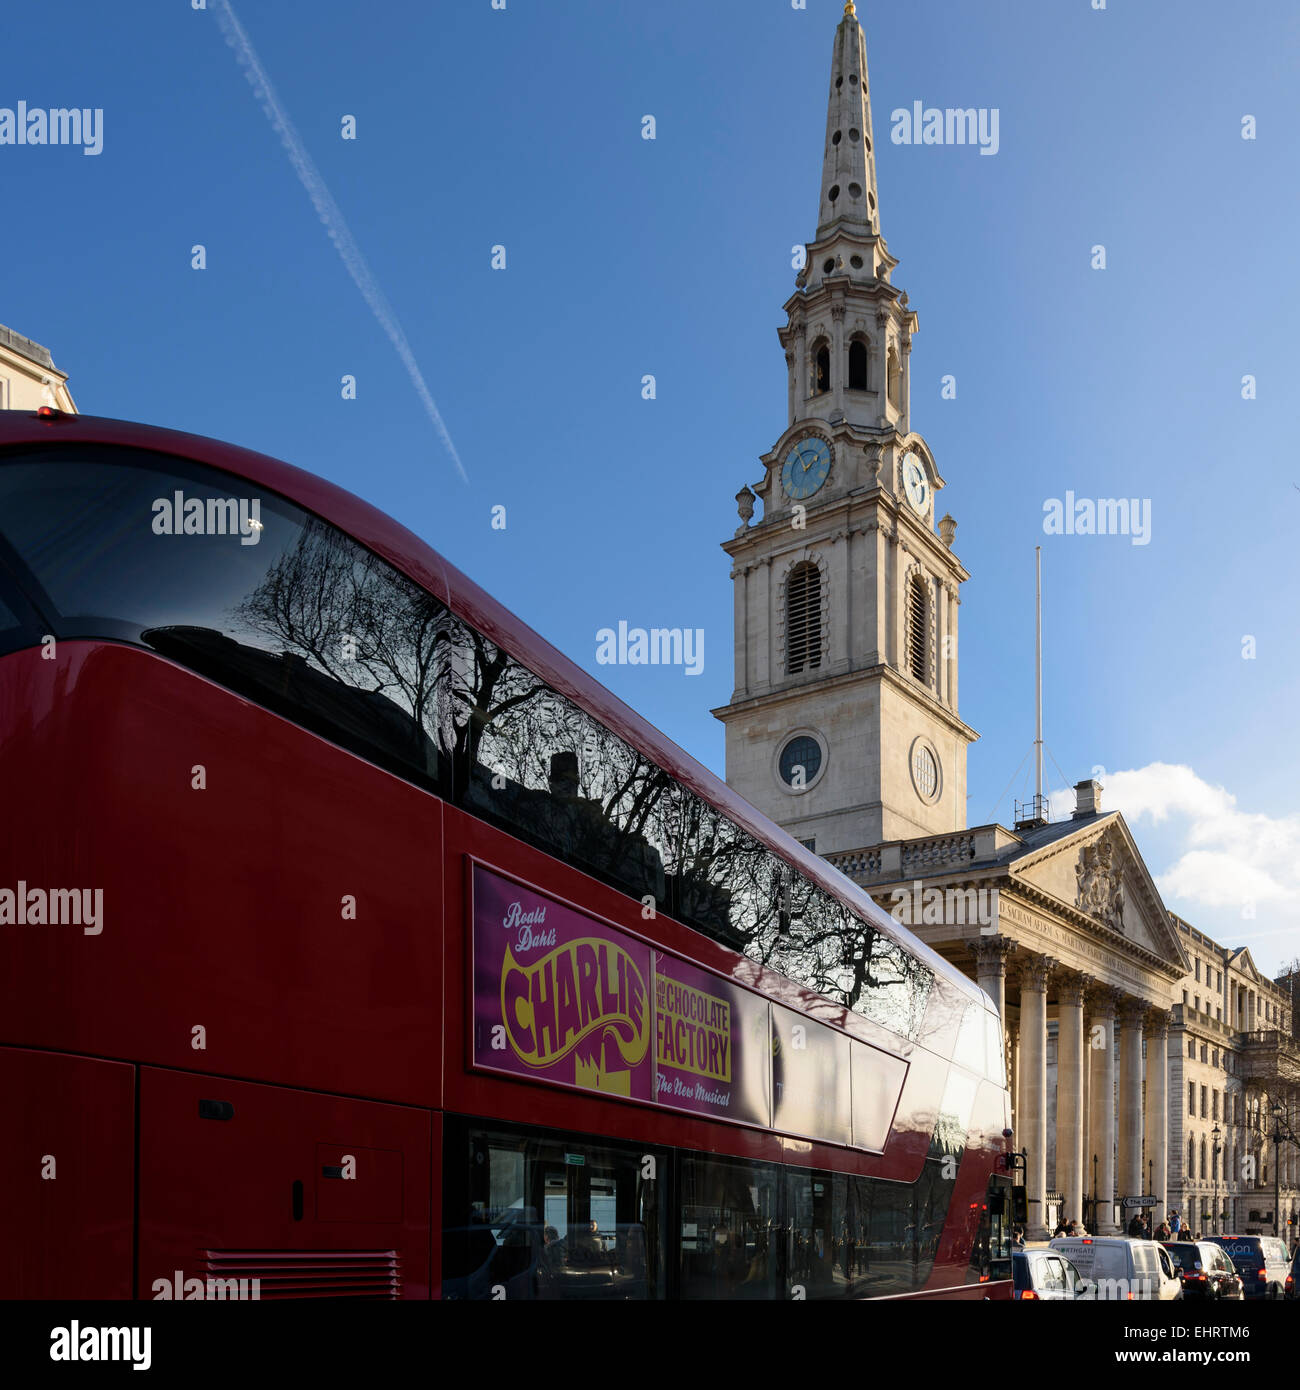 New London red double decker bus passing by St Martin-in-th-Field church near Trafalgar Square. Stock Photo